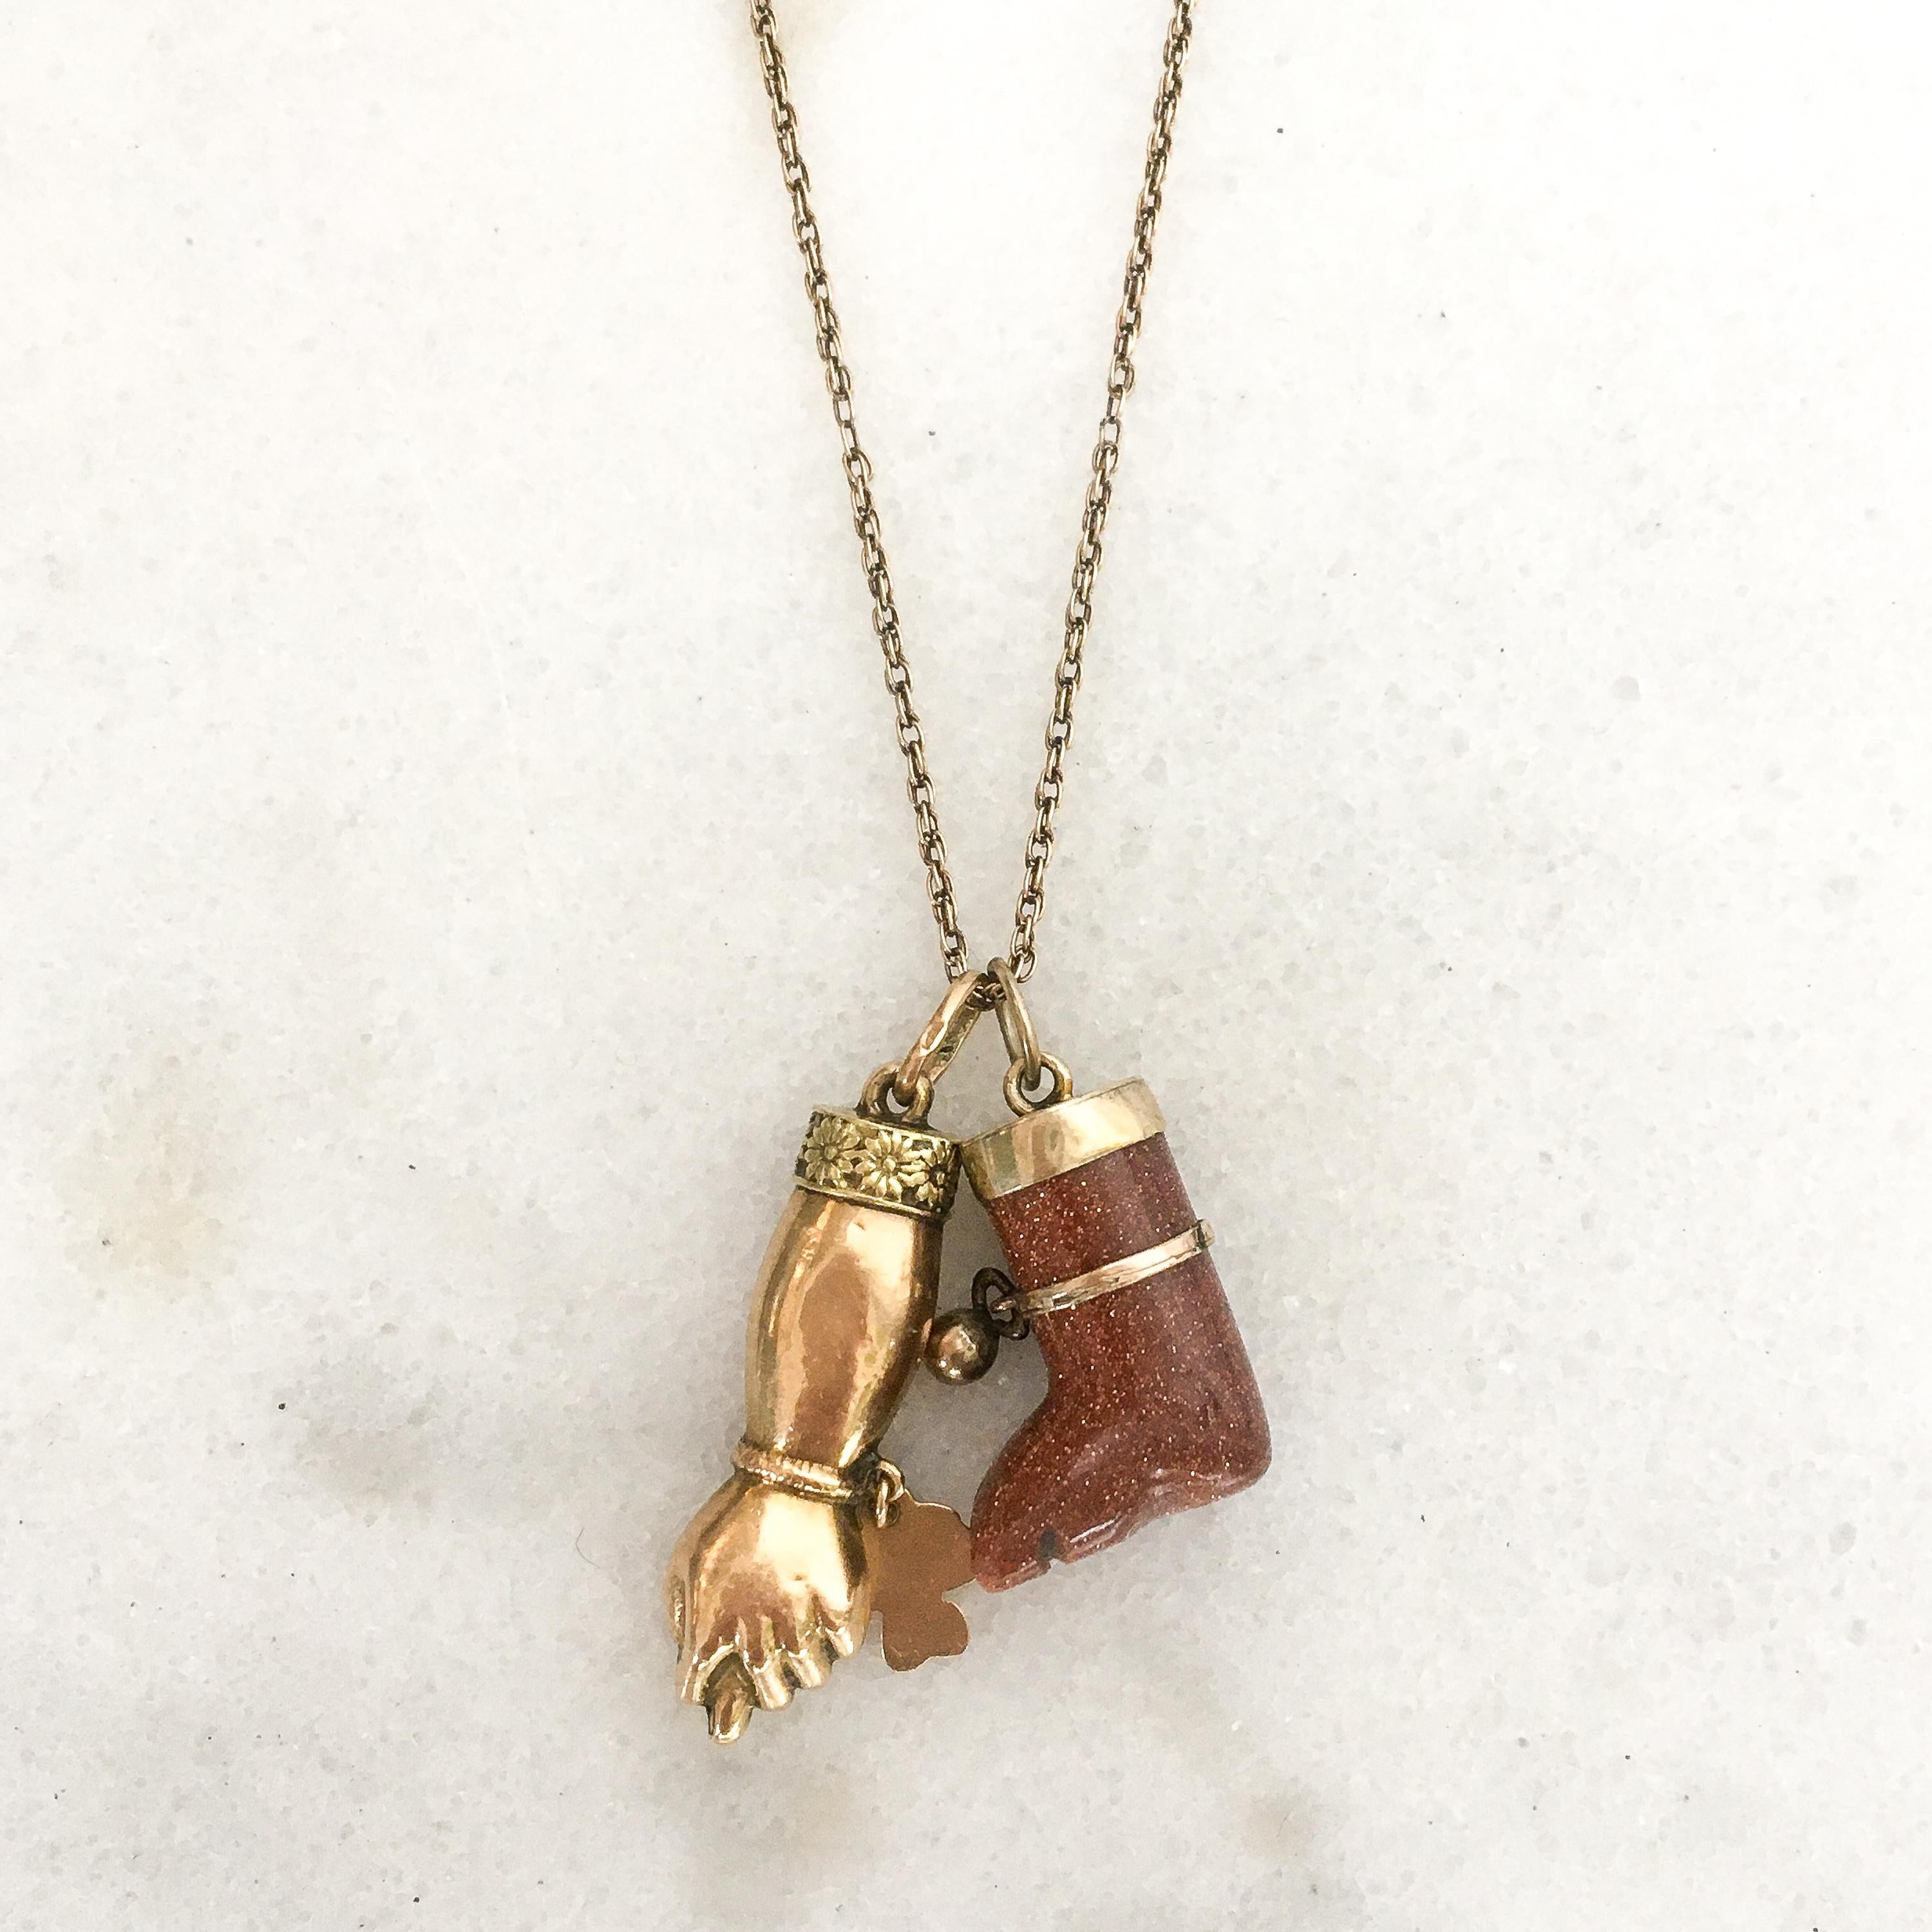 A vintage figa leg ex voto charm pendant, crafted in goldstone and 14 karat gold. The glittering religious offering leg is smooth polished with carved toes. Around the leg a gold band with a little ball is placed. The charm is great worn alone or